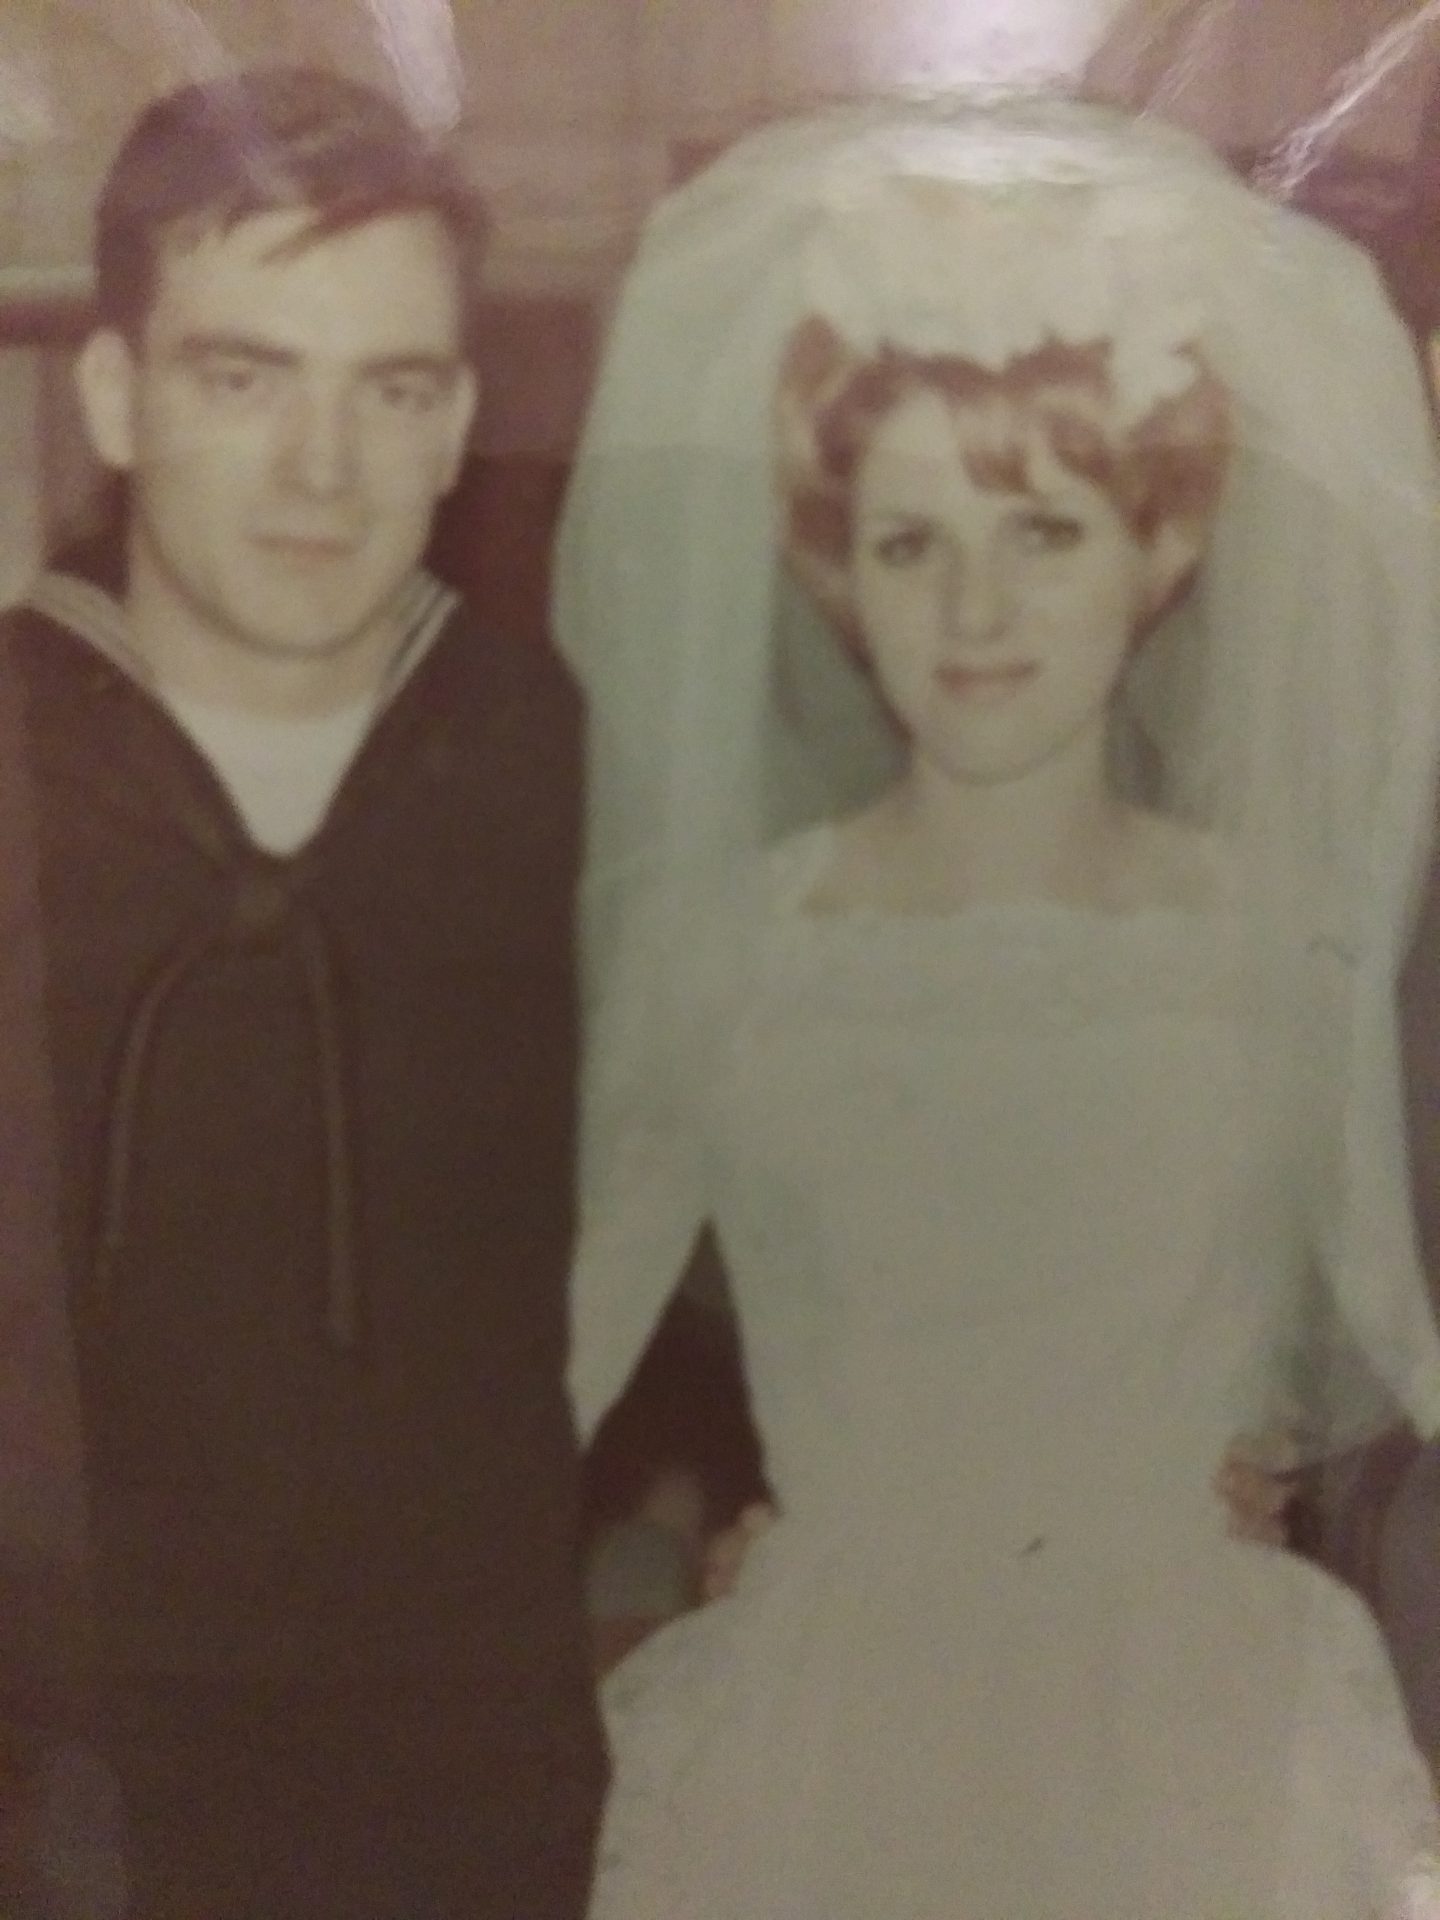 52 years February 14th, 1969 till February 14th, 2021. Happy Valentine's day and happy anniversary Shaun.  Love forever.